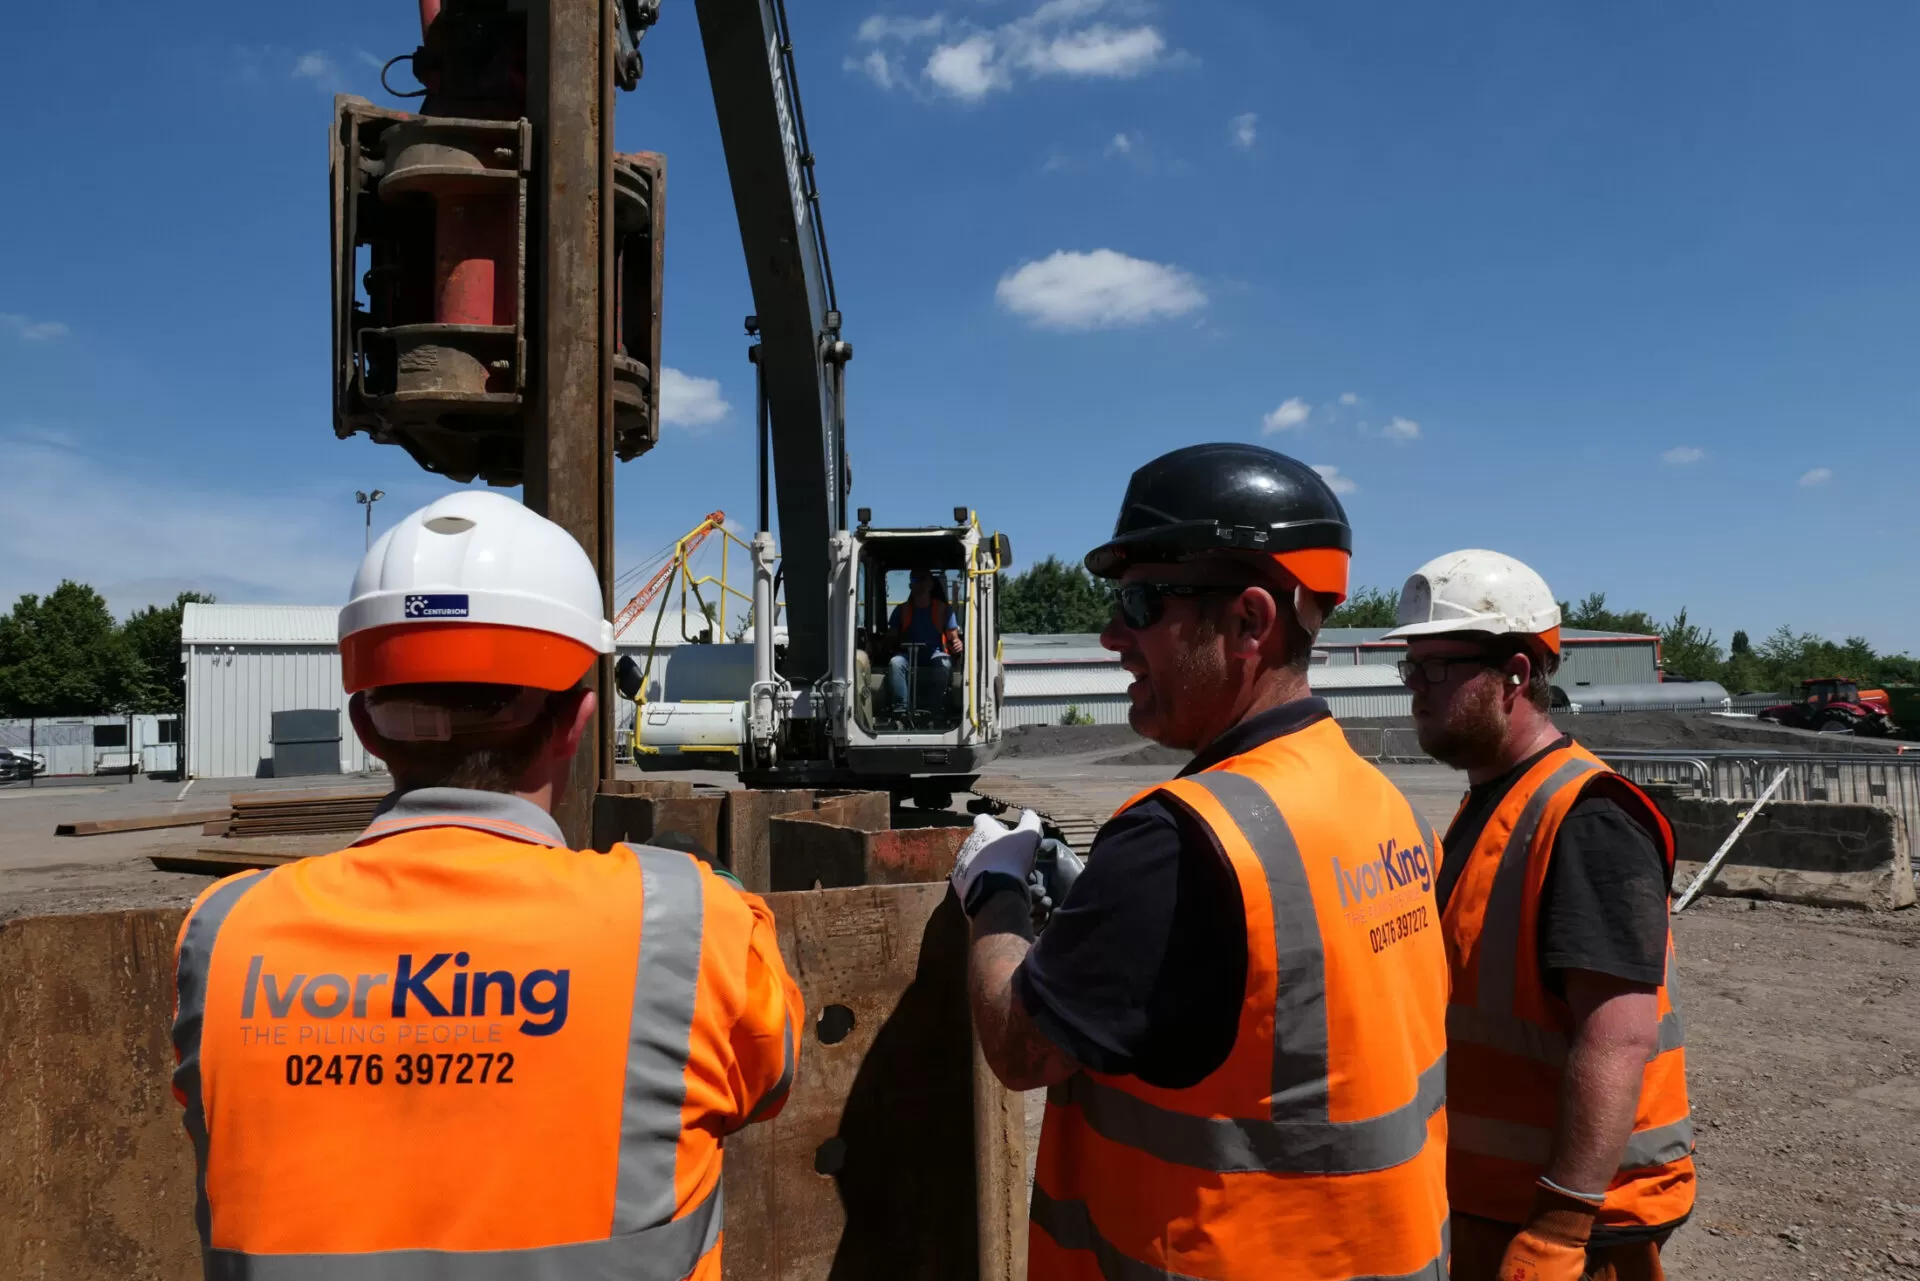 King Of Piling Chapter 1 Jobs & Careers | Ivor King - The Piling People